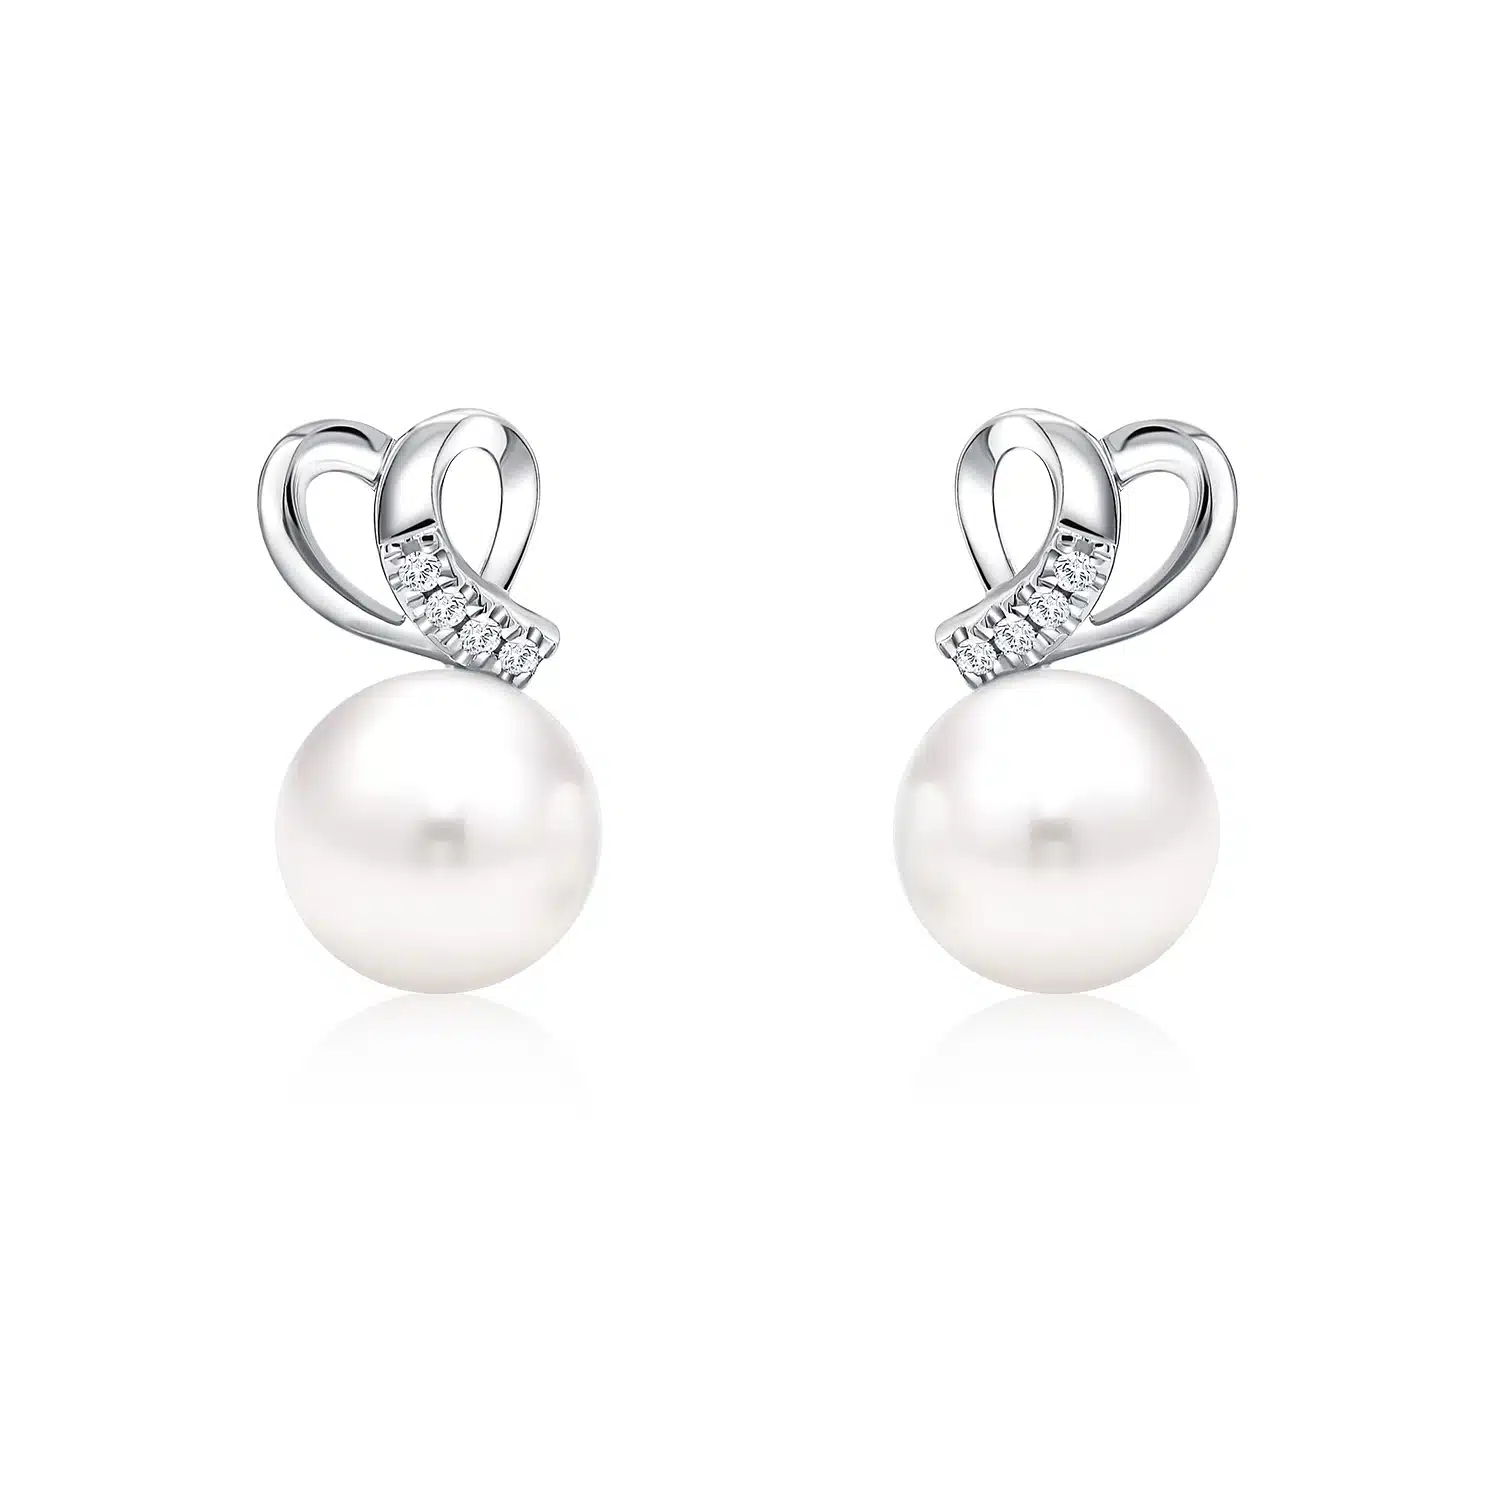 LOVE SIGN two delicate hearts PEARL STUD EARRINGS with 10k white gold